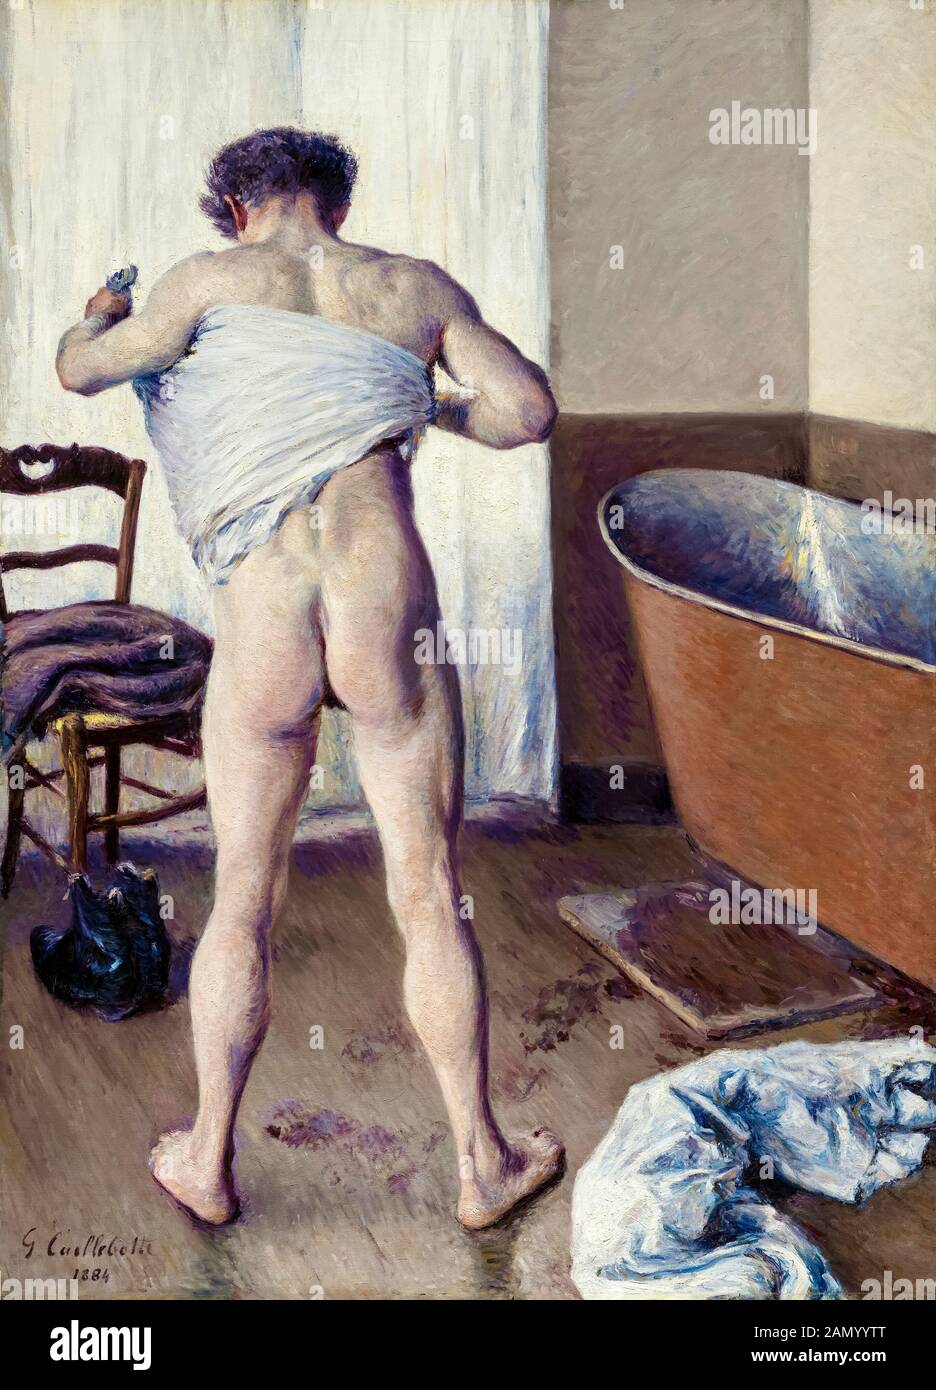 Gustave Caillebotte, Homme Au Bain, (Man at His Bath), painting, 1884 Stock Photo